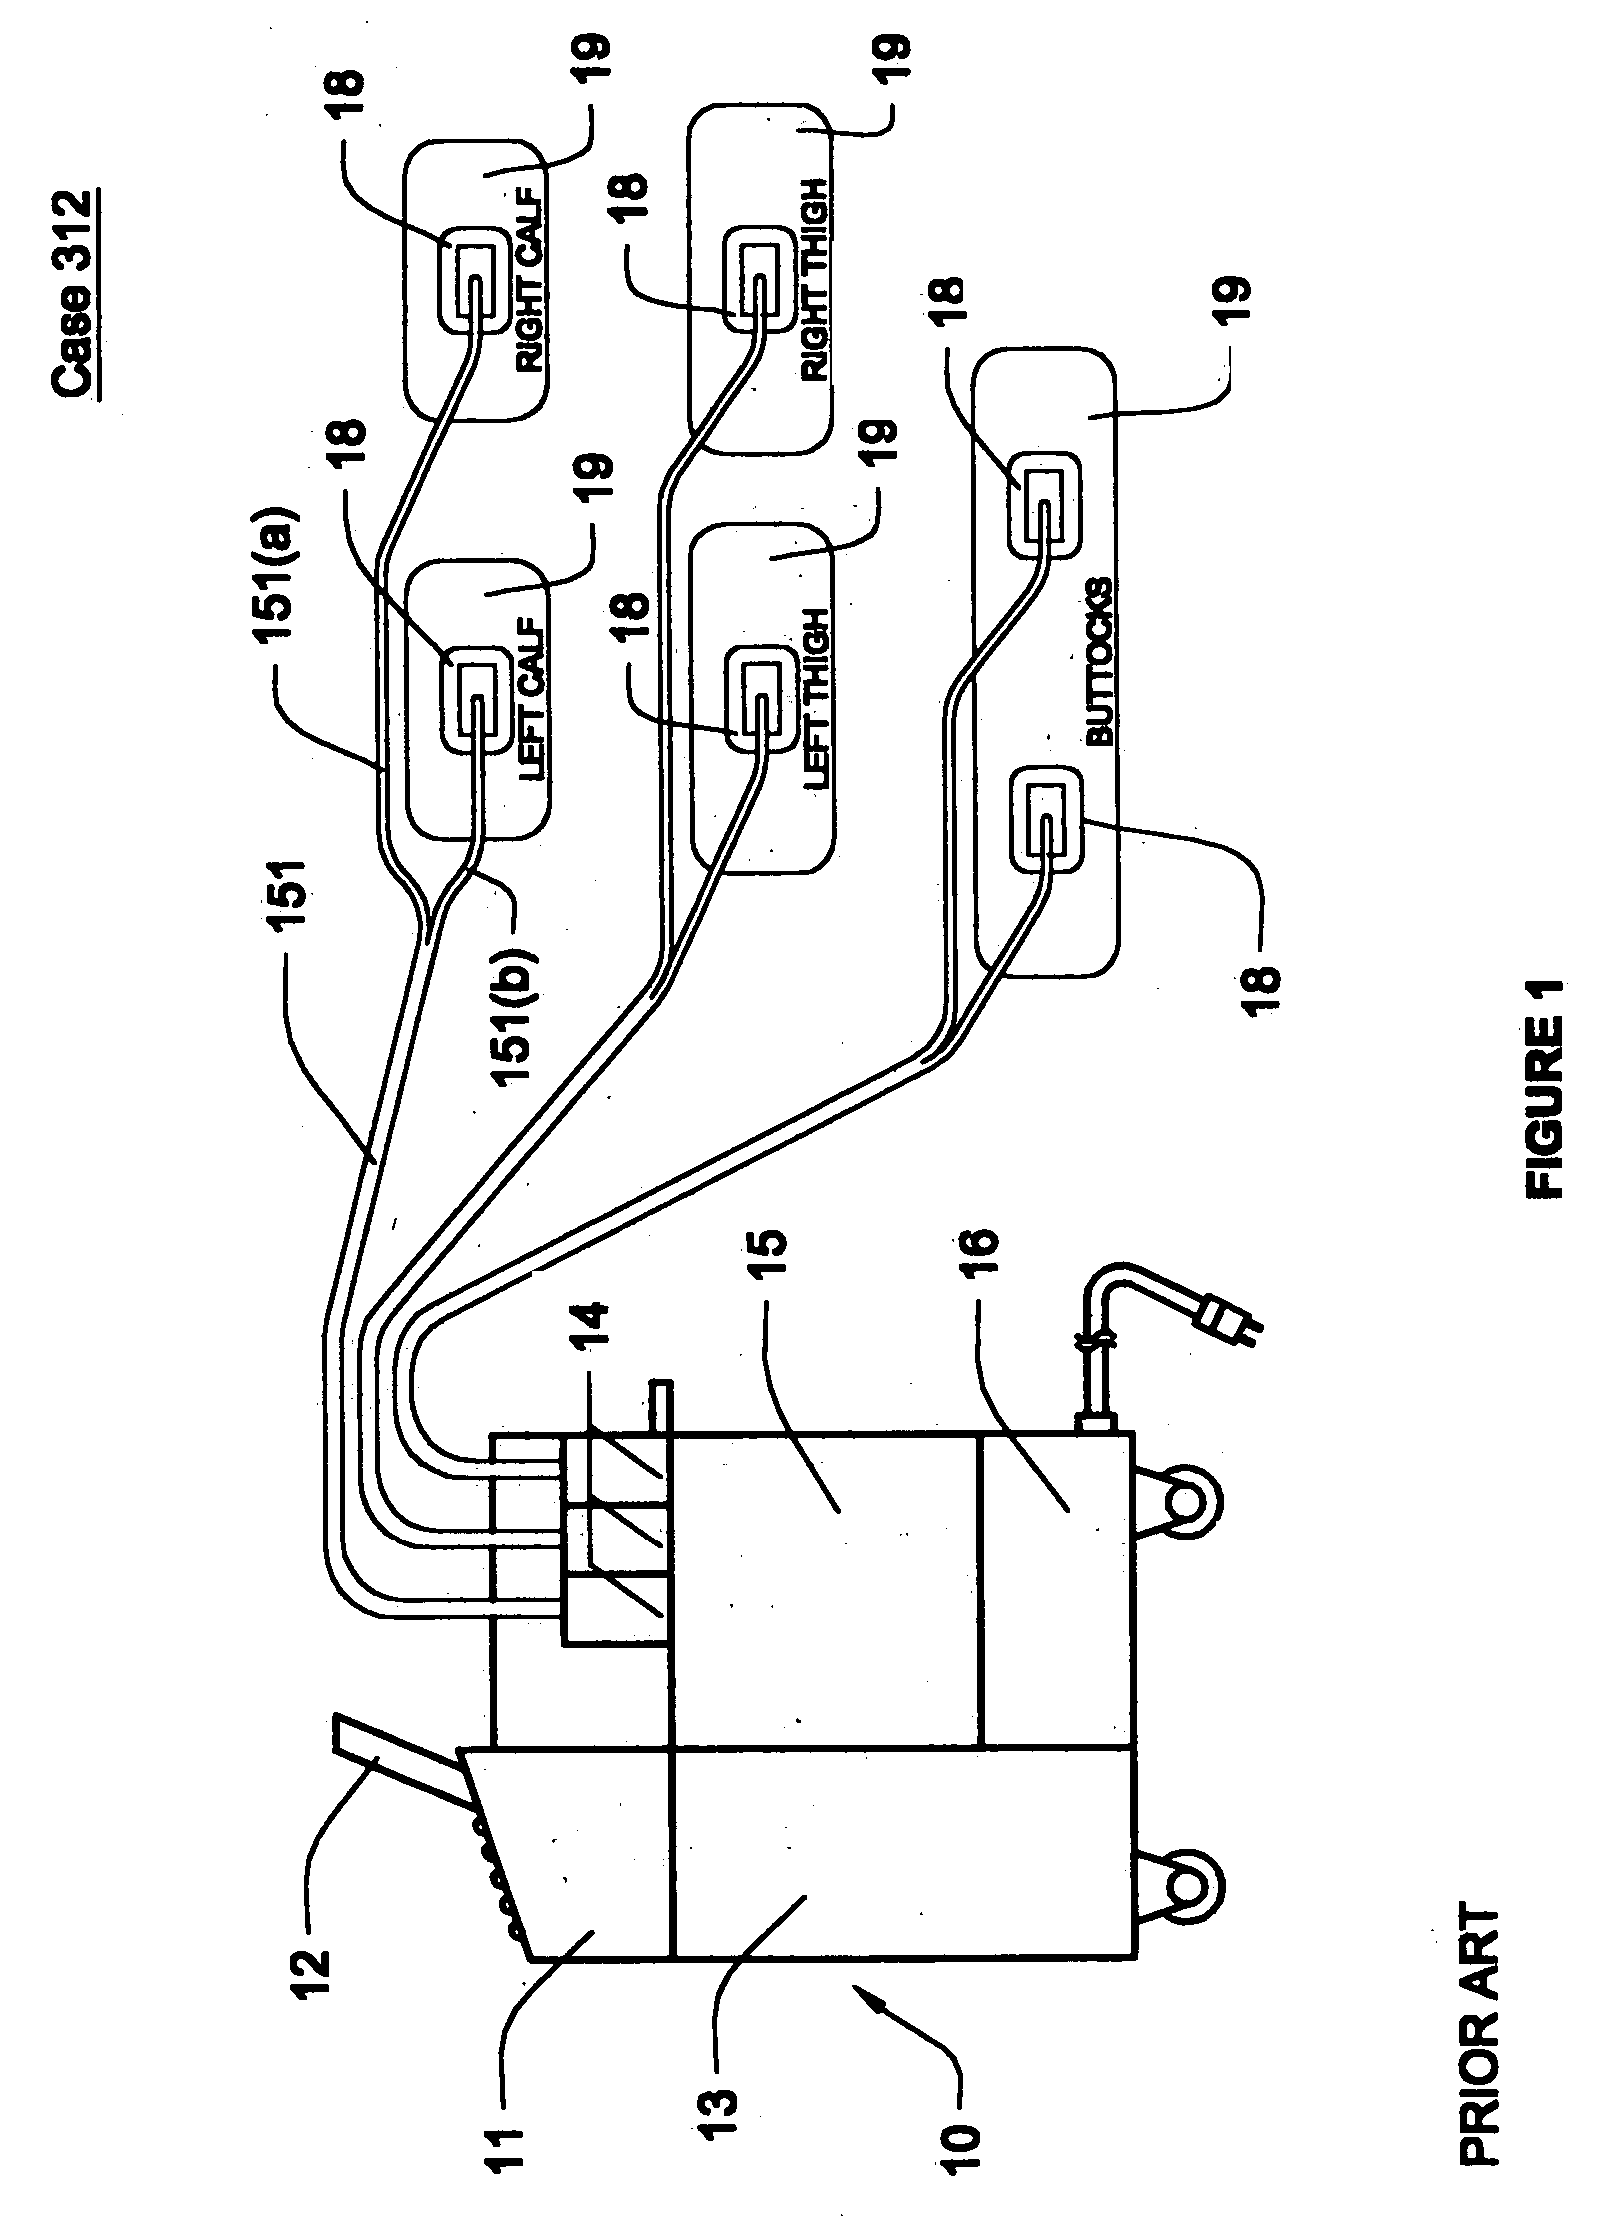 Devices and methods for non-invasively improving blood circulation